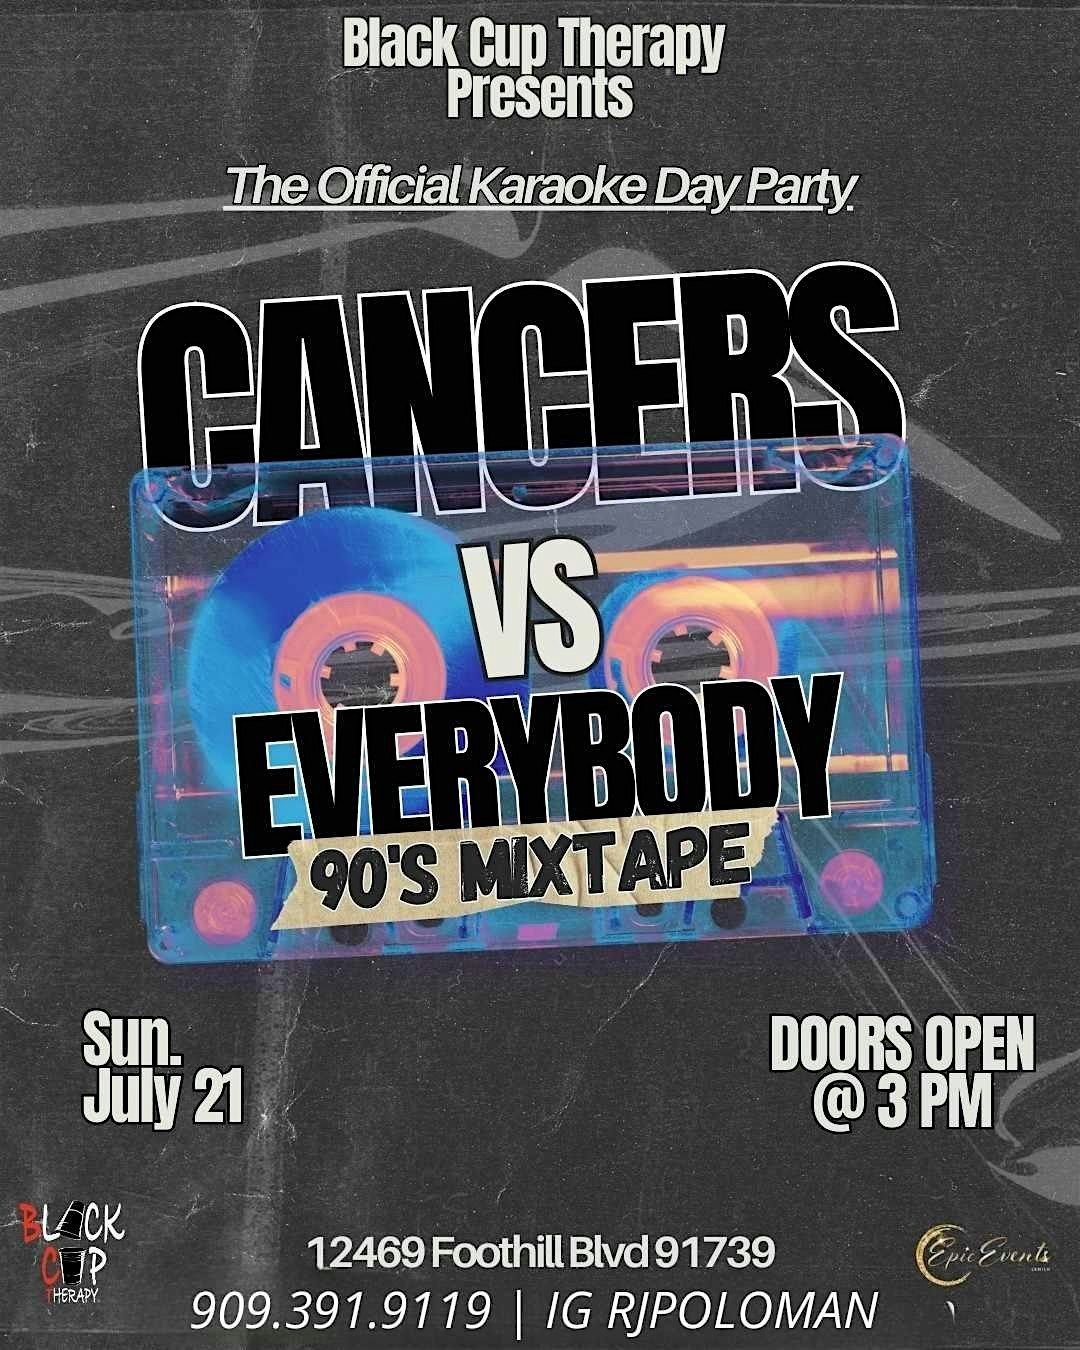 CANCERS VS EVERYBODY 90'S MIXTAPE EDITION KARAOKE DAY PARTY